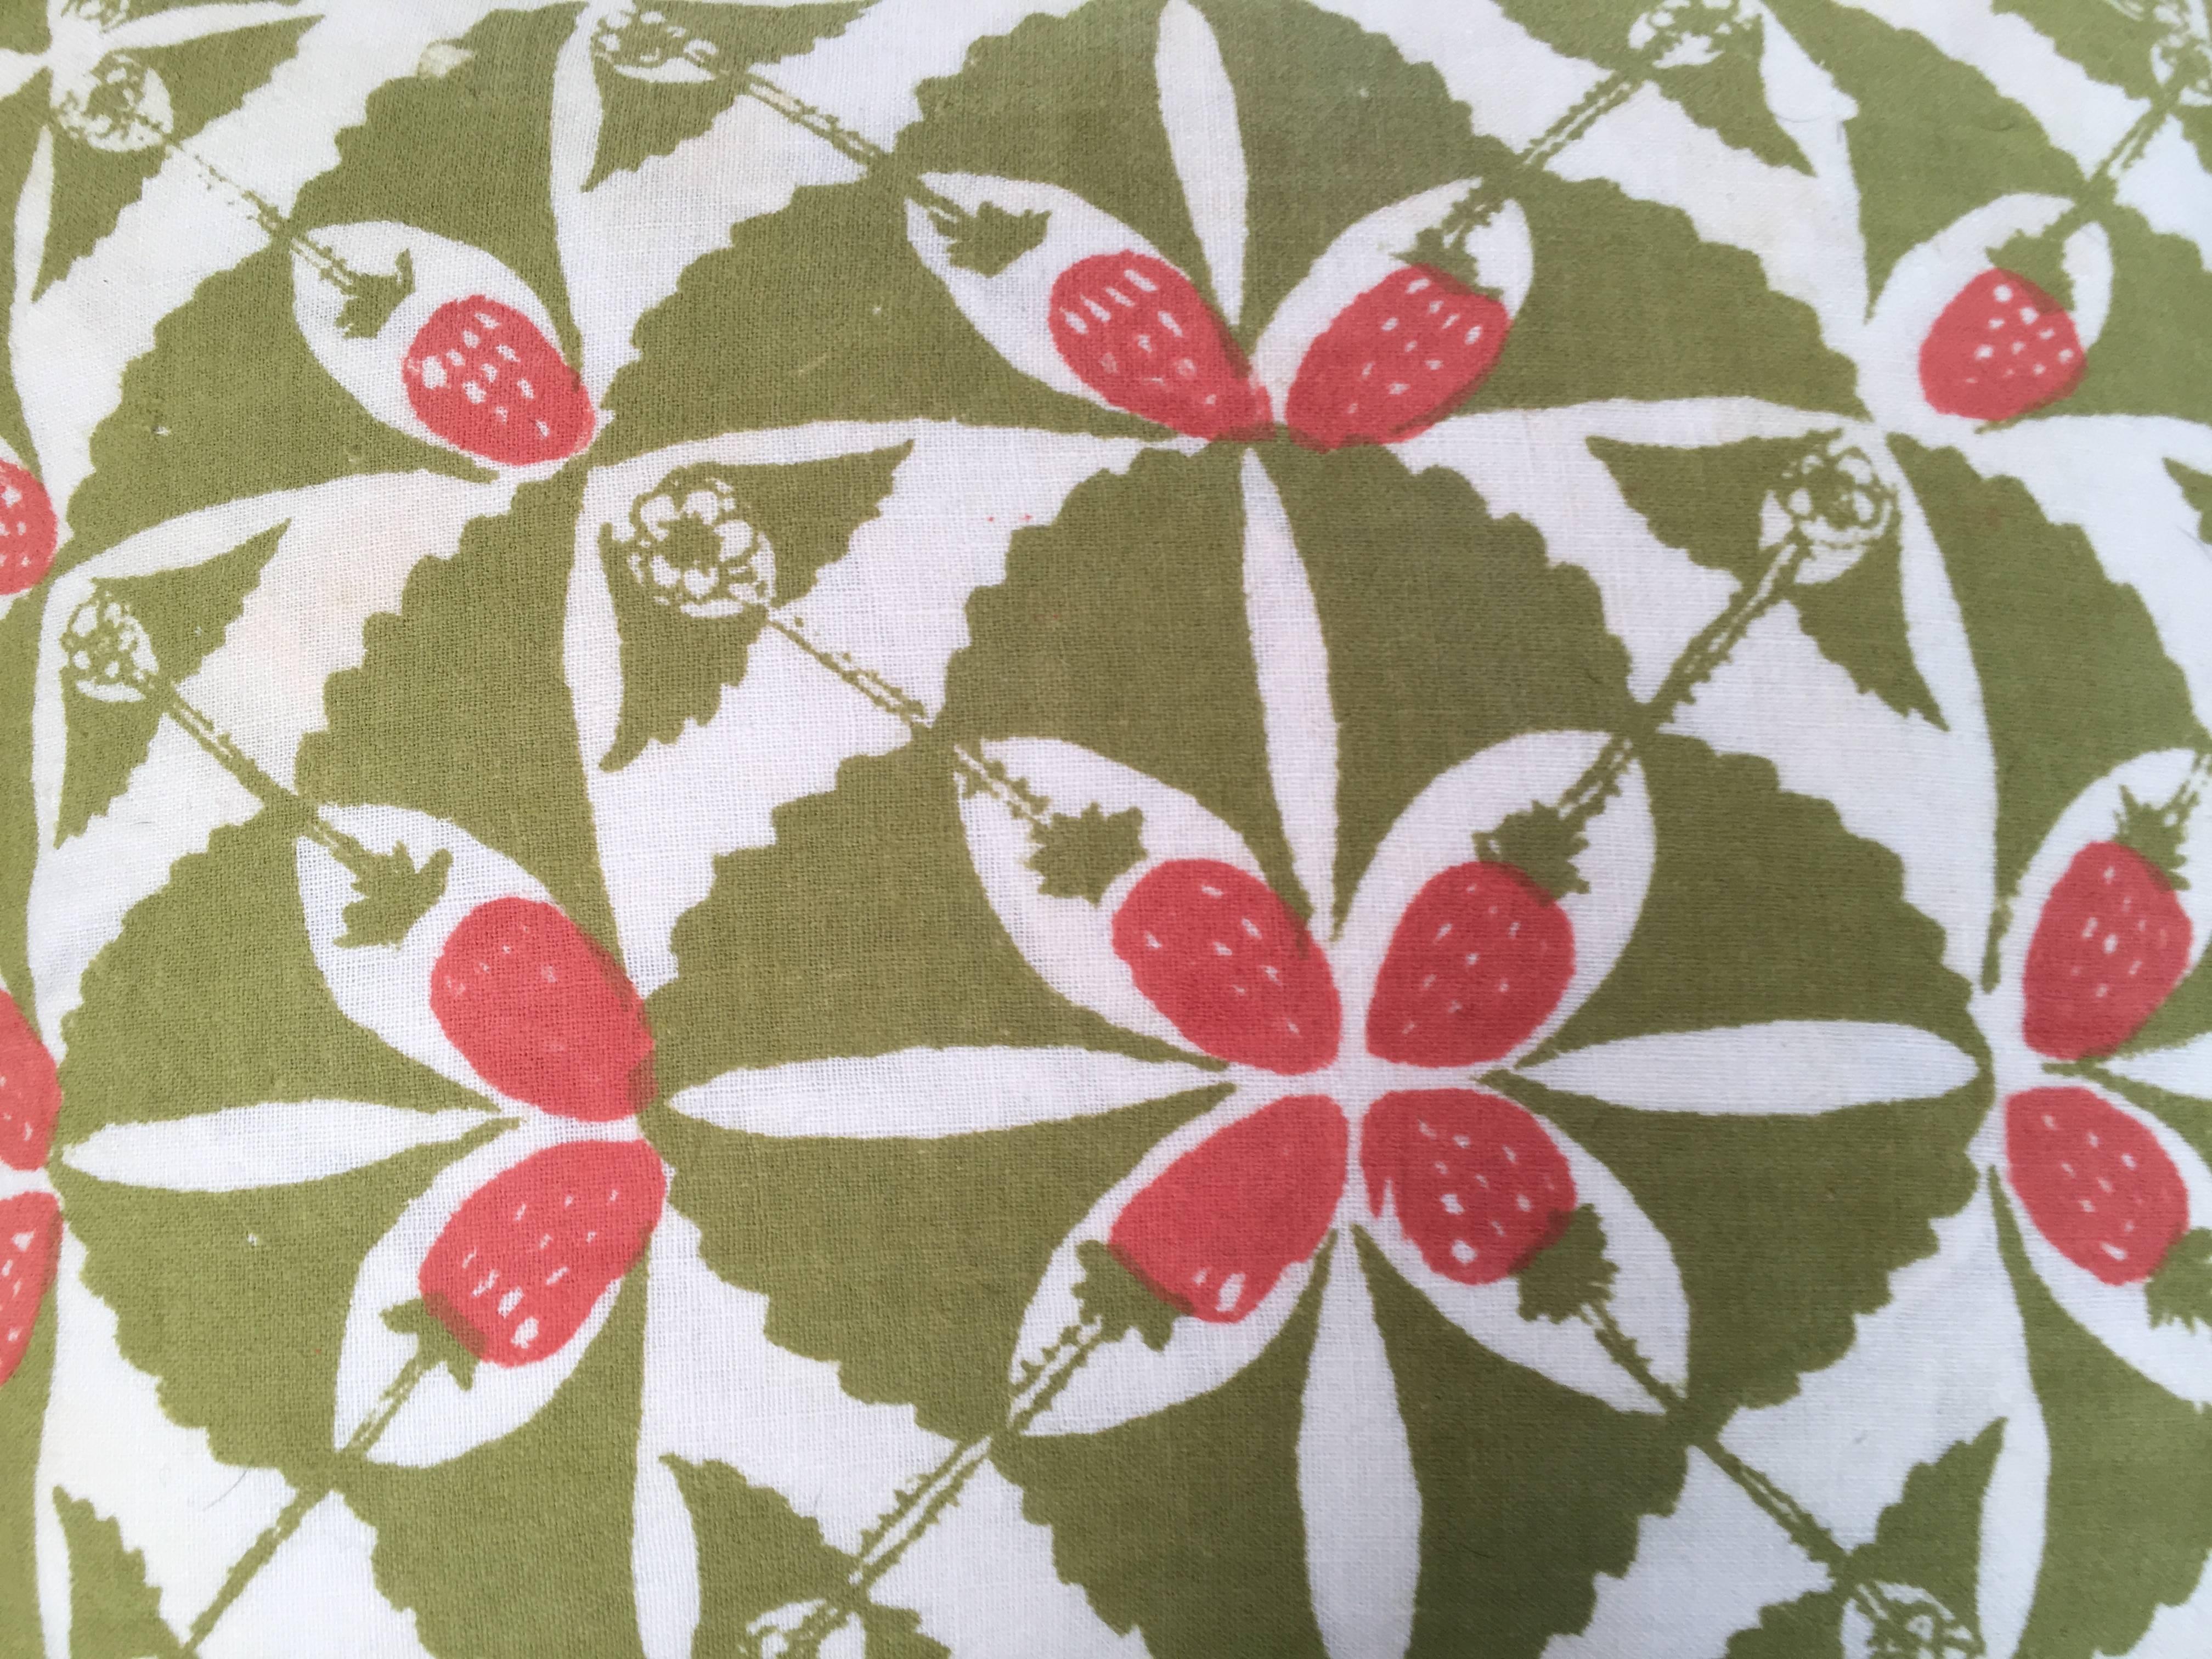 Arts and Crafts Hand Block Printed Strawberry Patch Pillow by the Folly Cove Designers